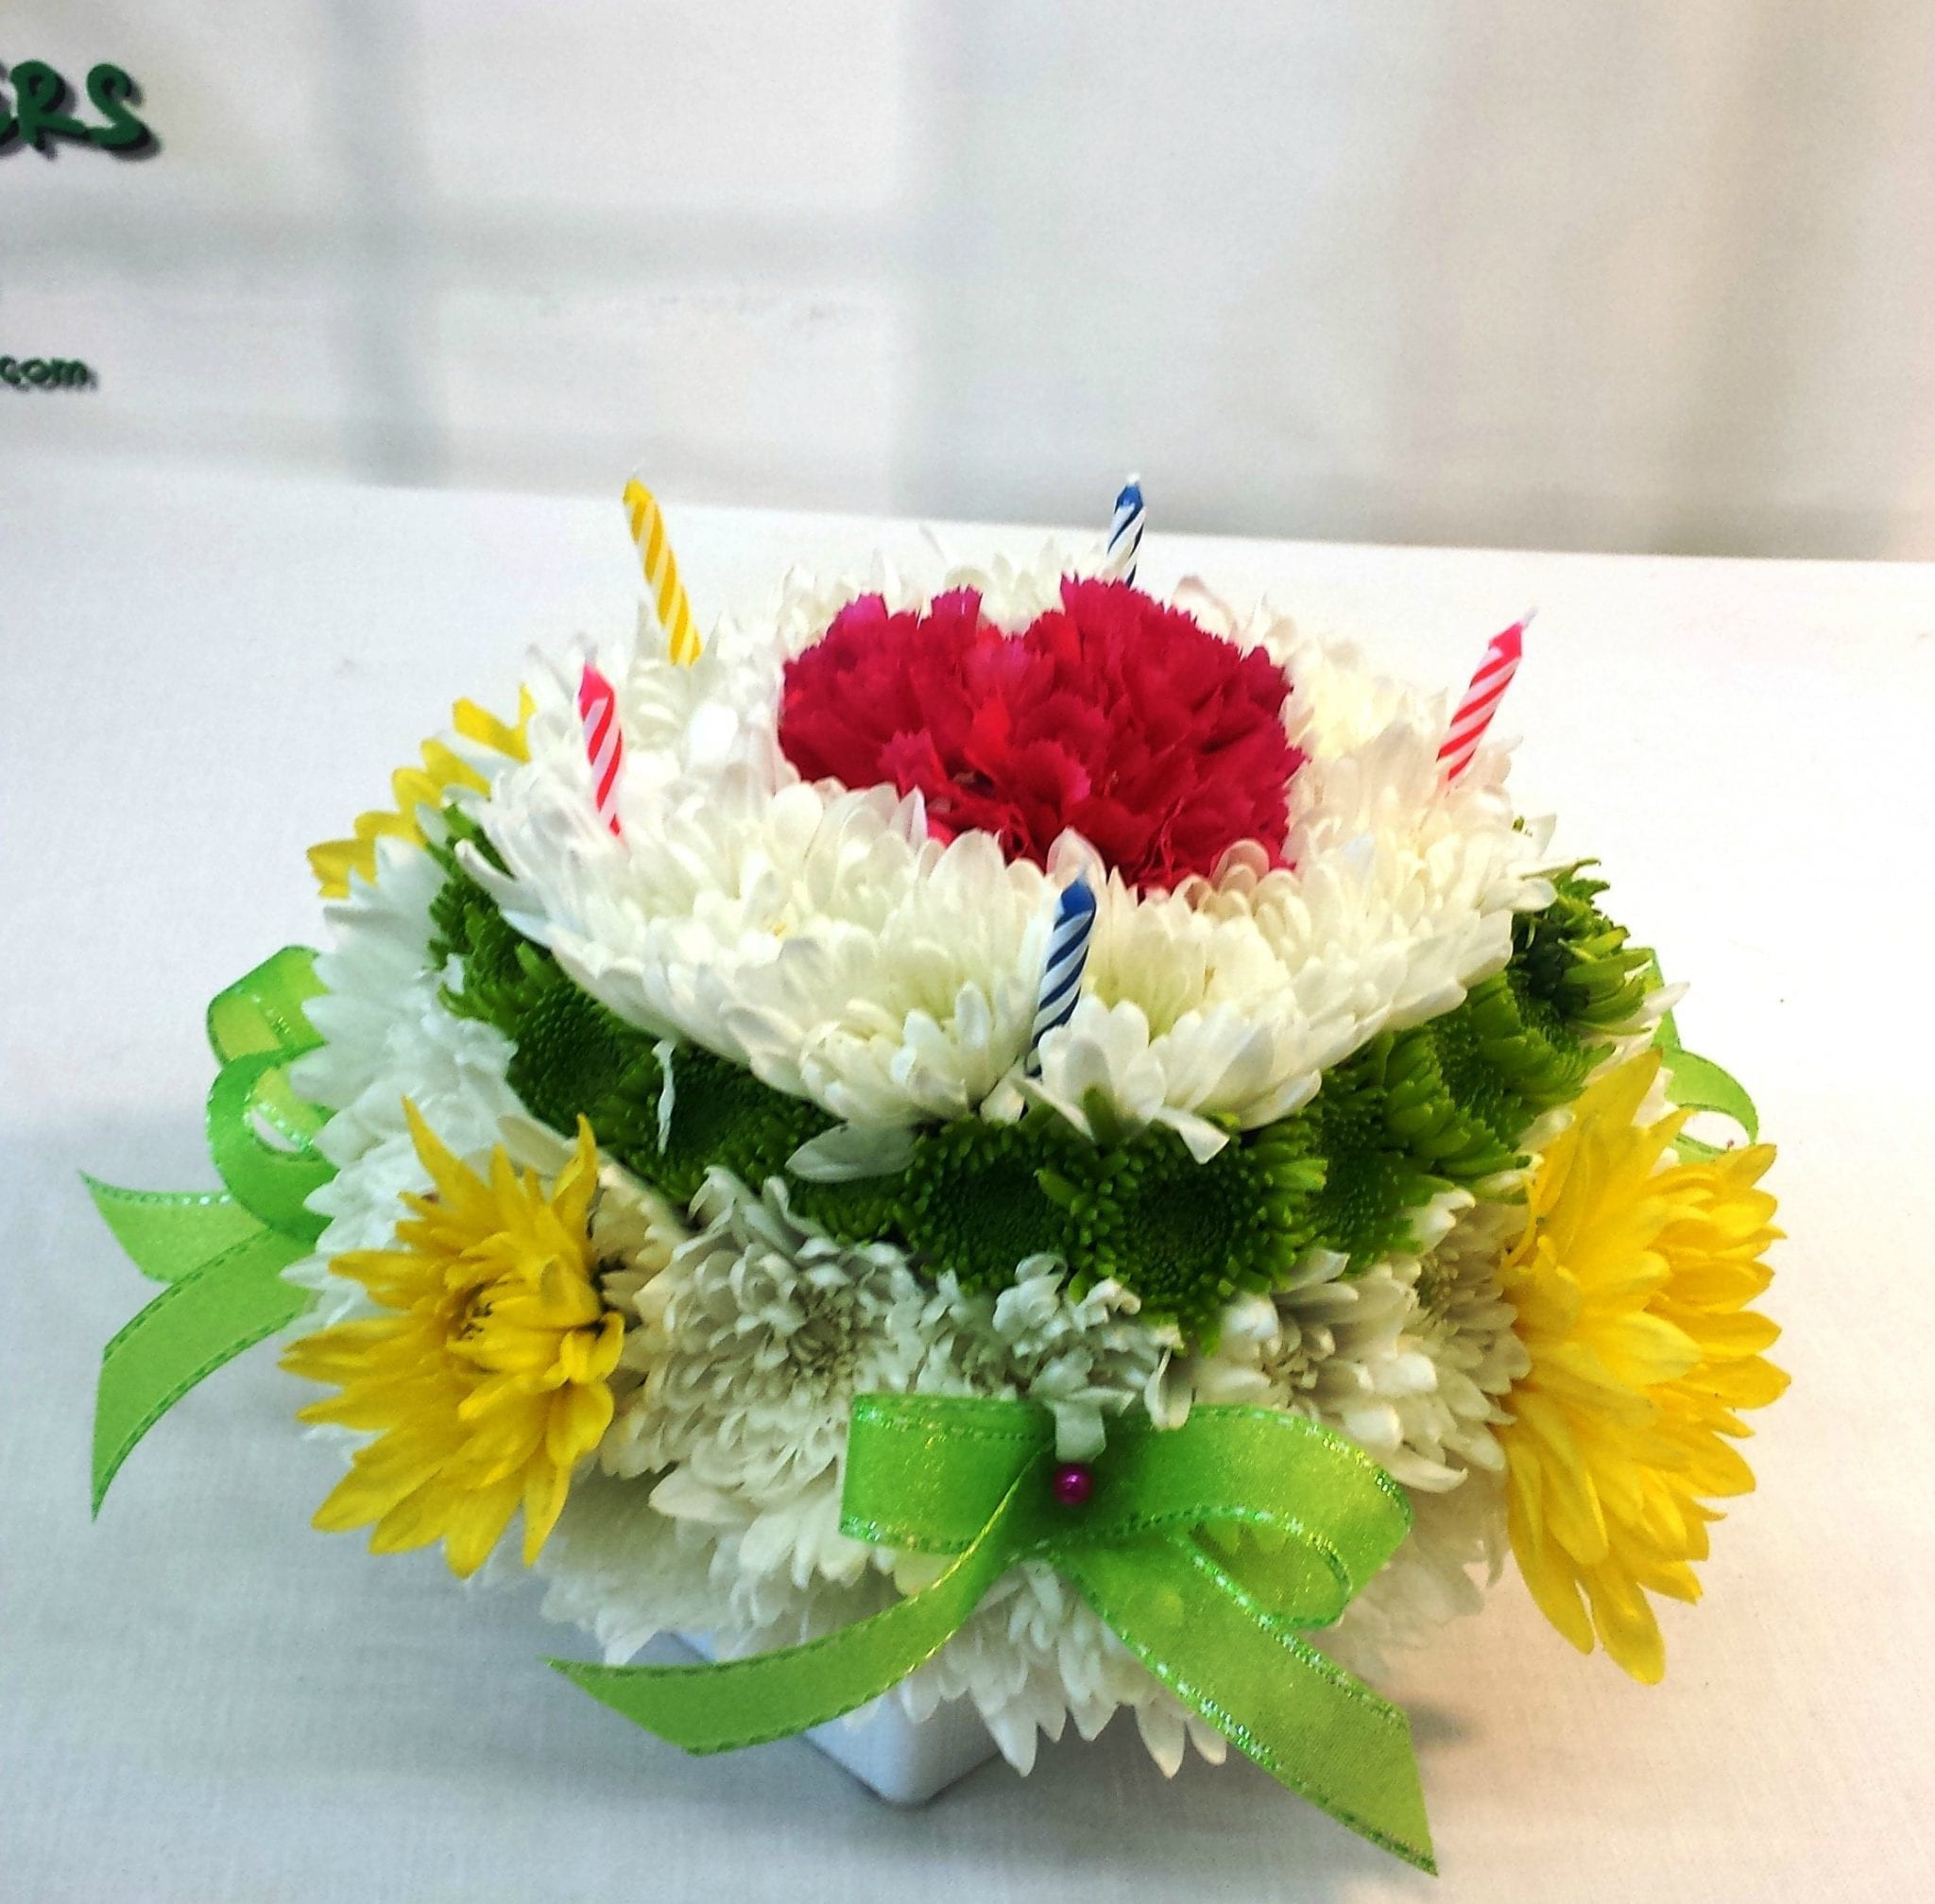 Birthday Gifts Same Day Delivery
 SAME DAY DELIVERY Birthday Flower Cake Green and Yellow